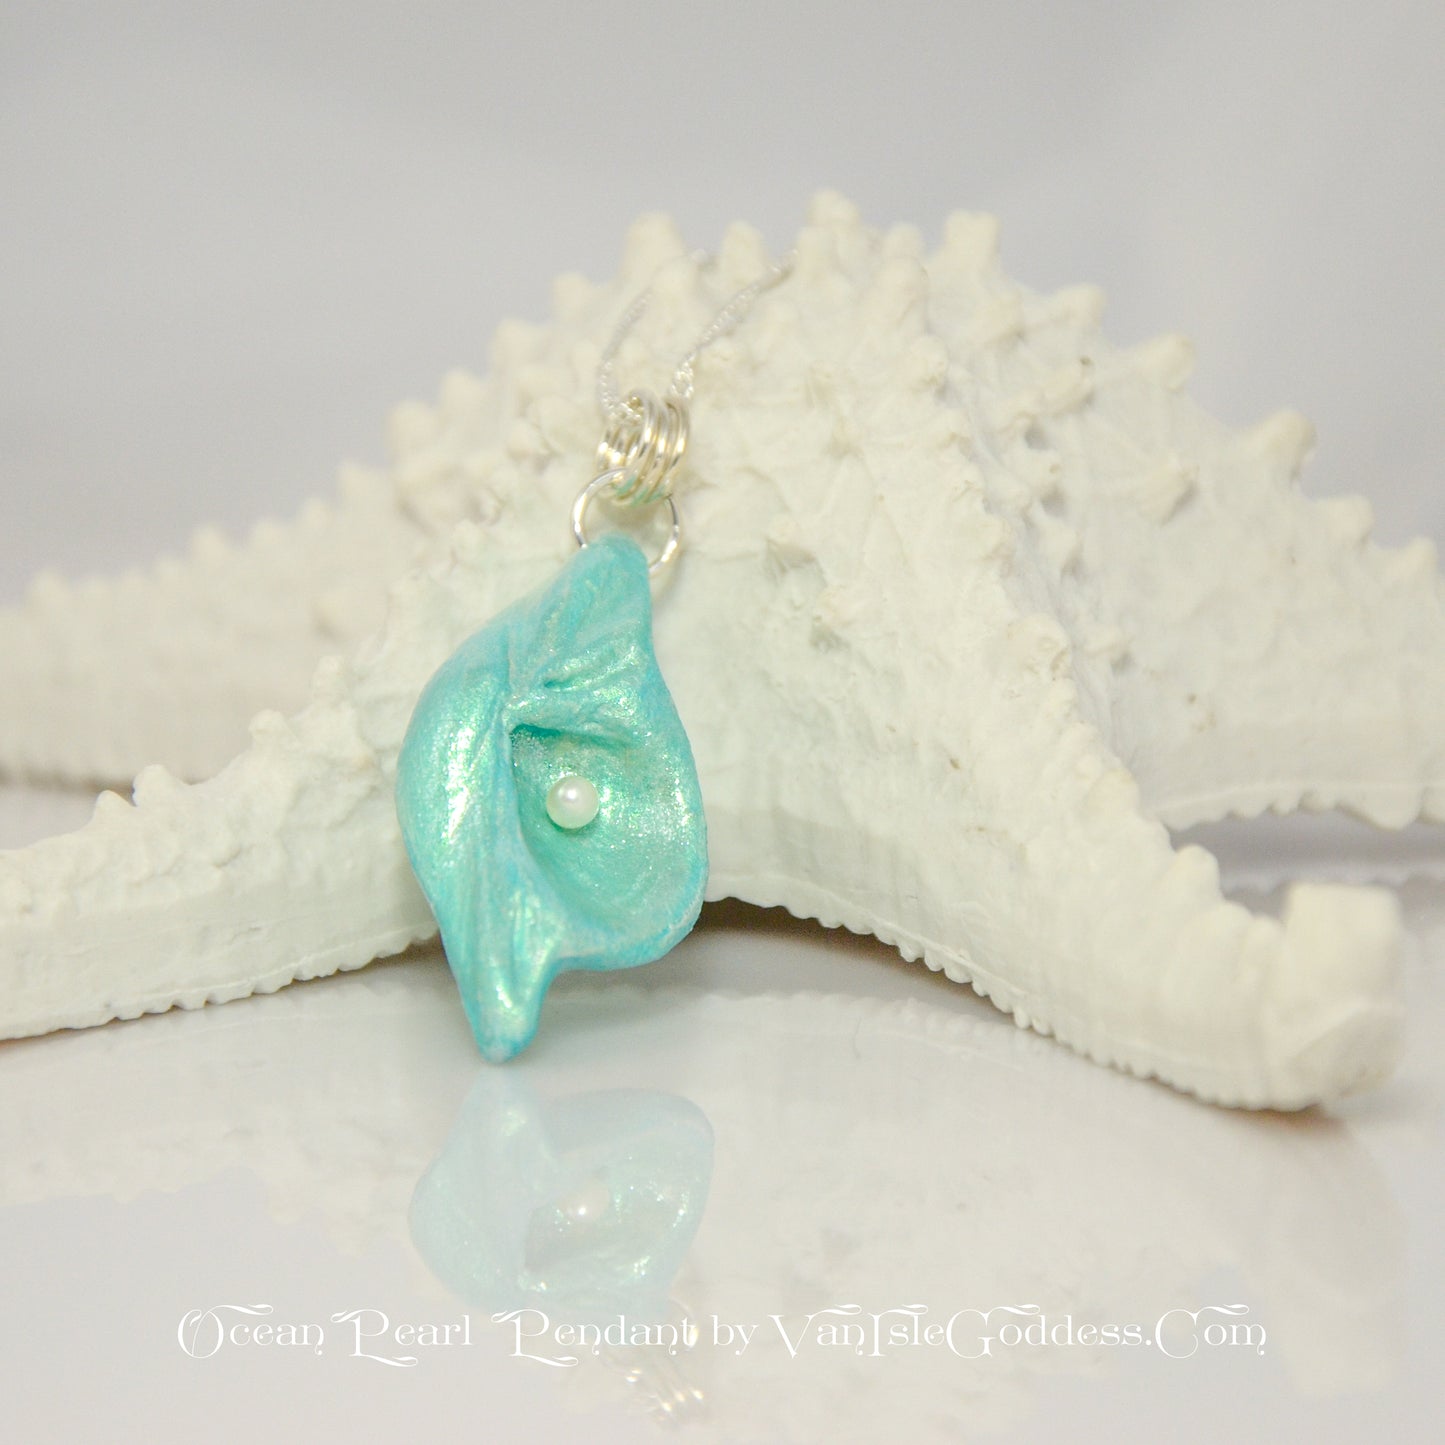 Ocean Pearl natural seashell pendant has a  real freshwater baby pearl. The pendant rests on a starfish. The words on the bottom of the image says:  Ocean Pearl Pendant by Van Isle Goddess dot com